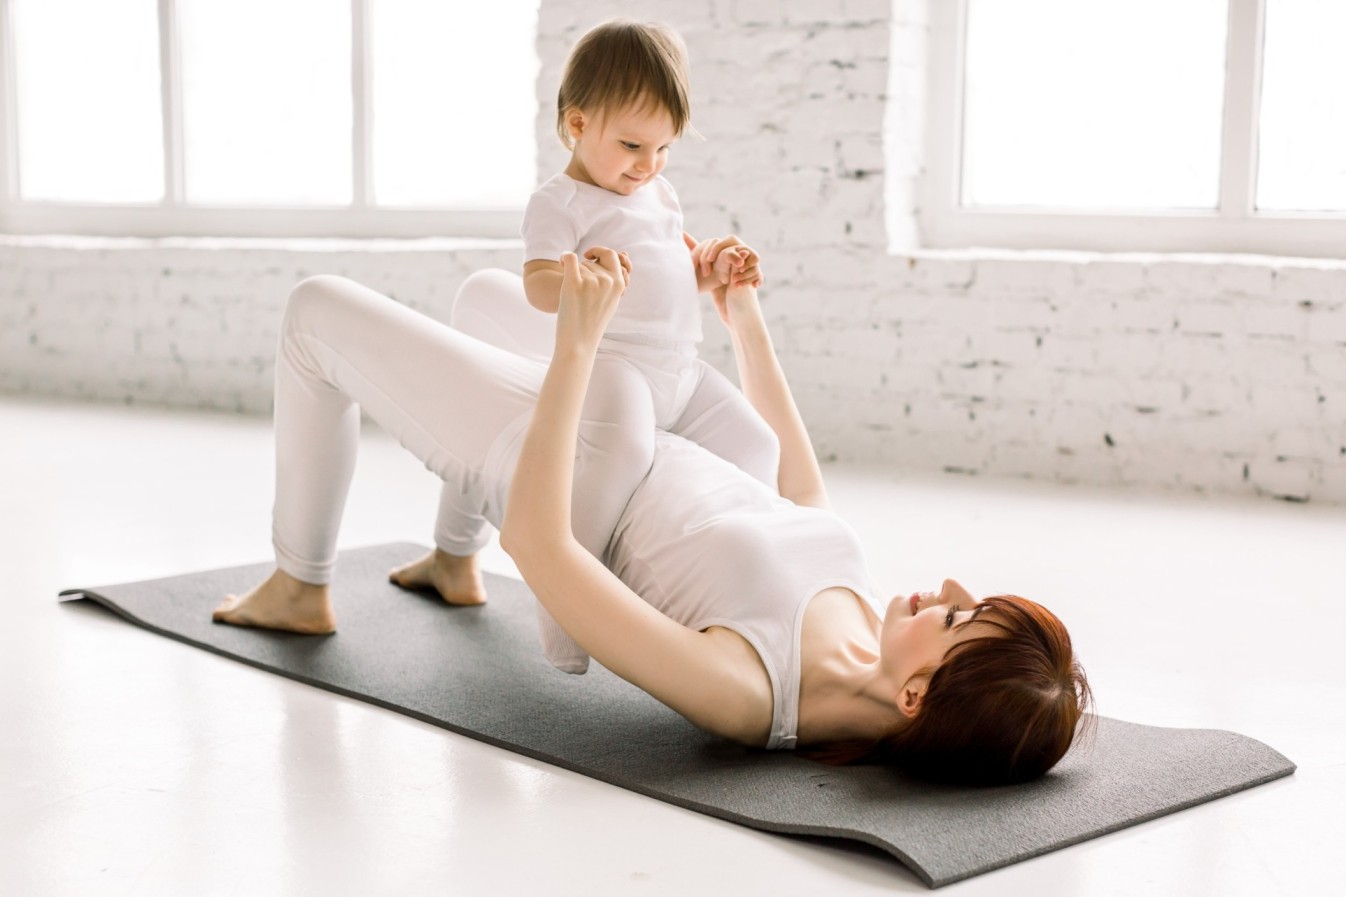 7 Postpartum Fitness Myths Experts Want You to Stop Believing